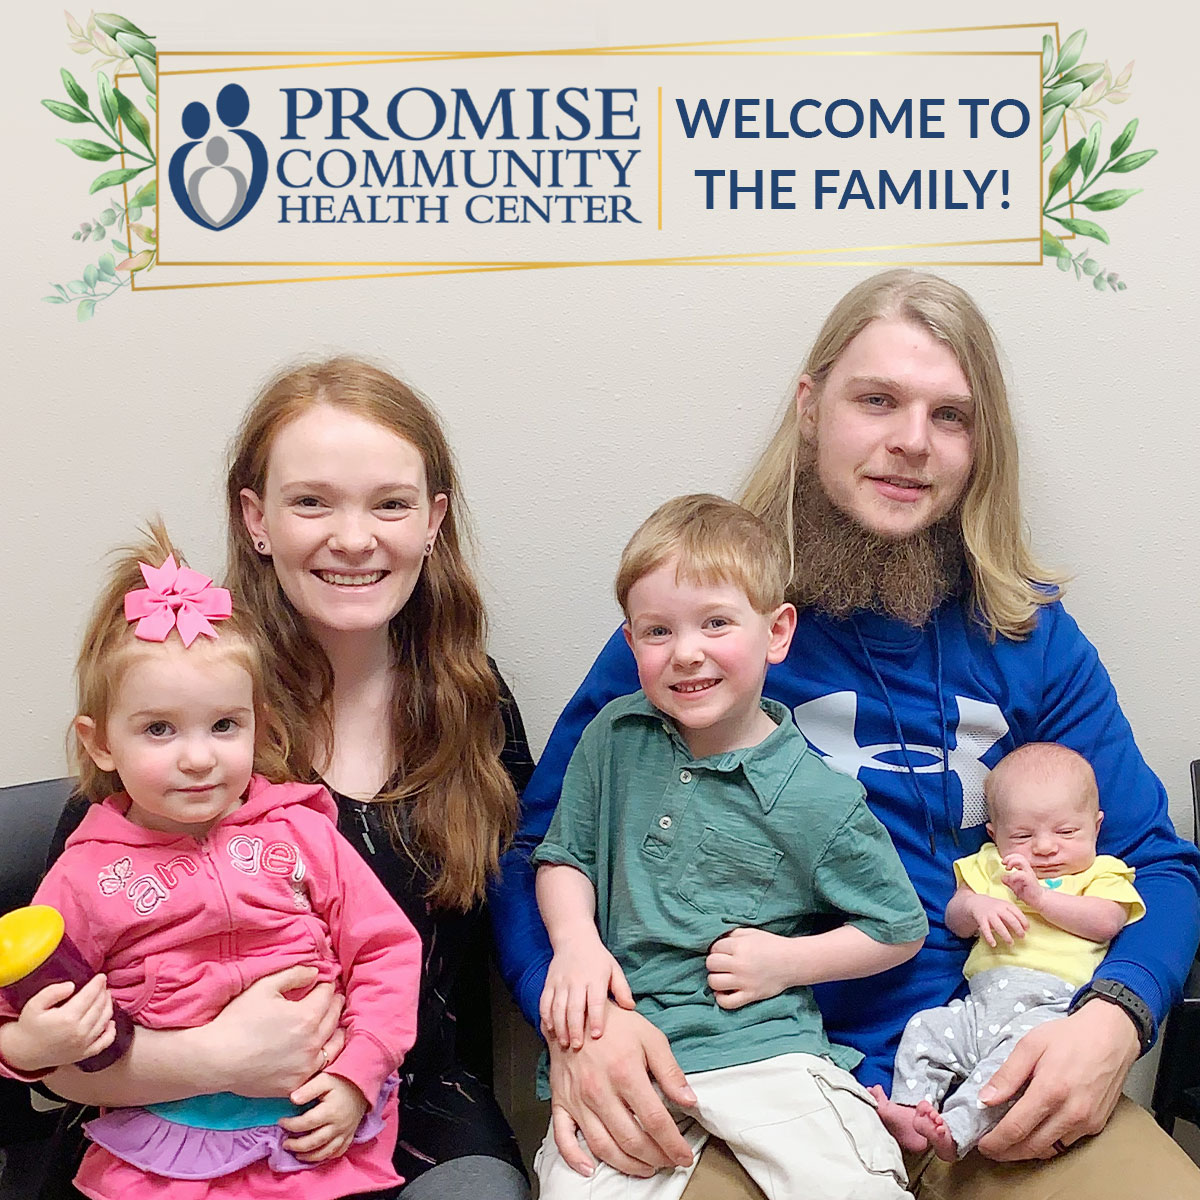 Hop Family in Moville, Iowa Home Birth | Promise Community Health Center in Sioux Center, Iowa | Home births in northwest Iowa, Home births in southeast South Dakota, Home births in southwest Minnesota | Home births in Sioux Falls South Dakota, Home births in Beresford South Dakota, Home births in Sioux City IA, Home births in LeMars IA, Home births in Worthington MN, Home births in Iowa, Home births in South Dakota, Home births in Minnesota